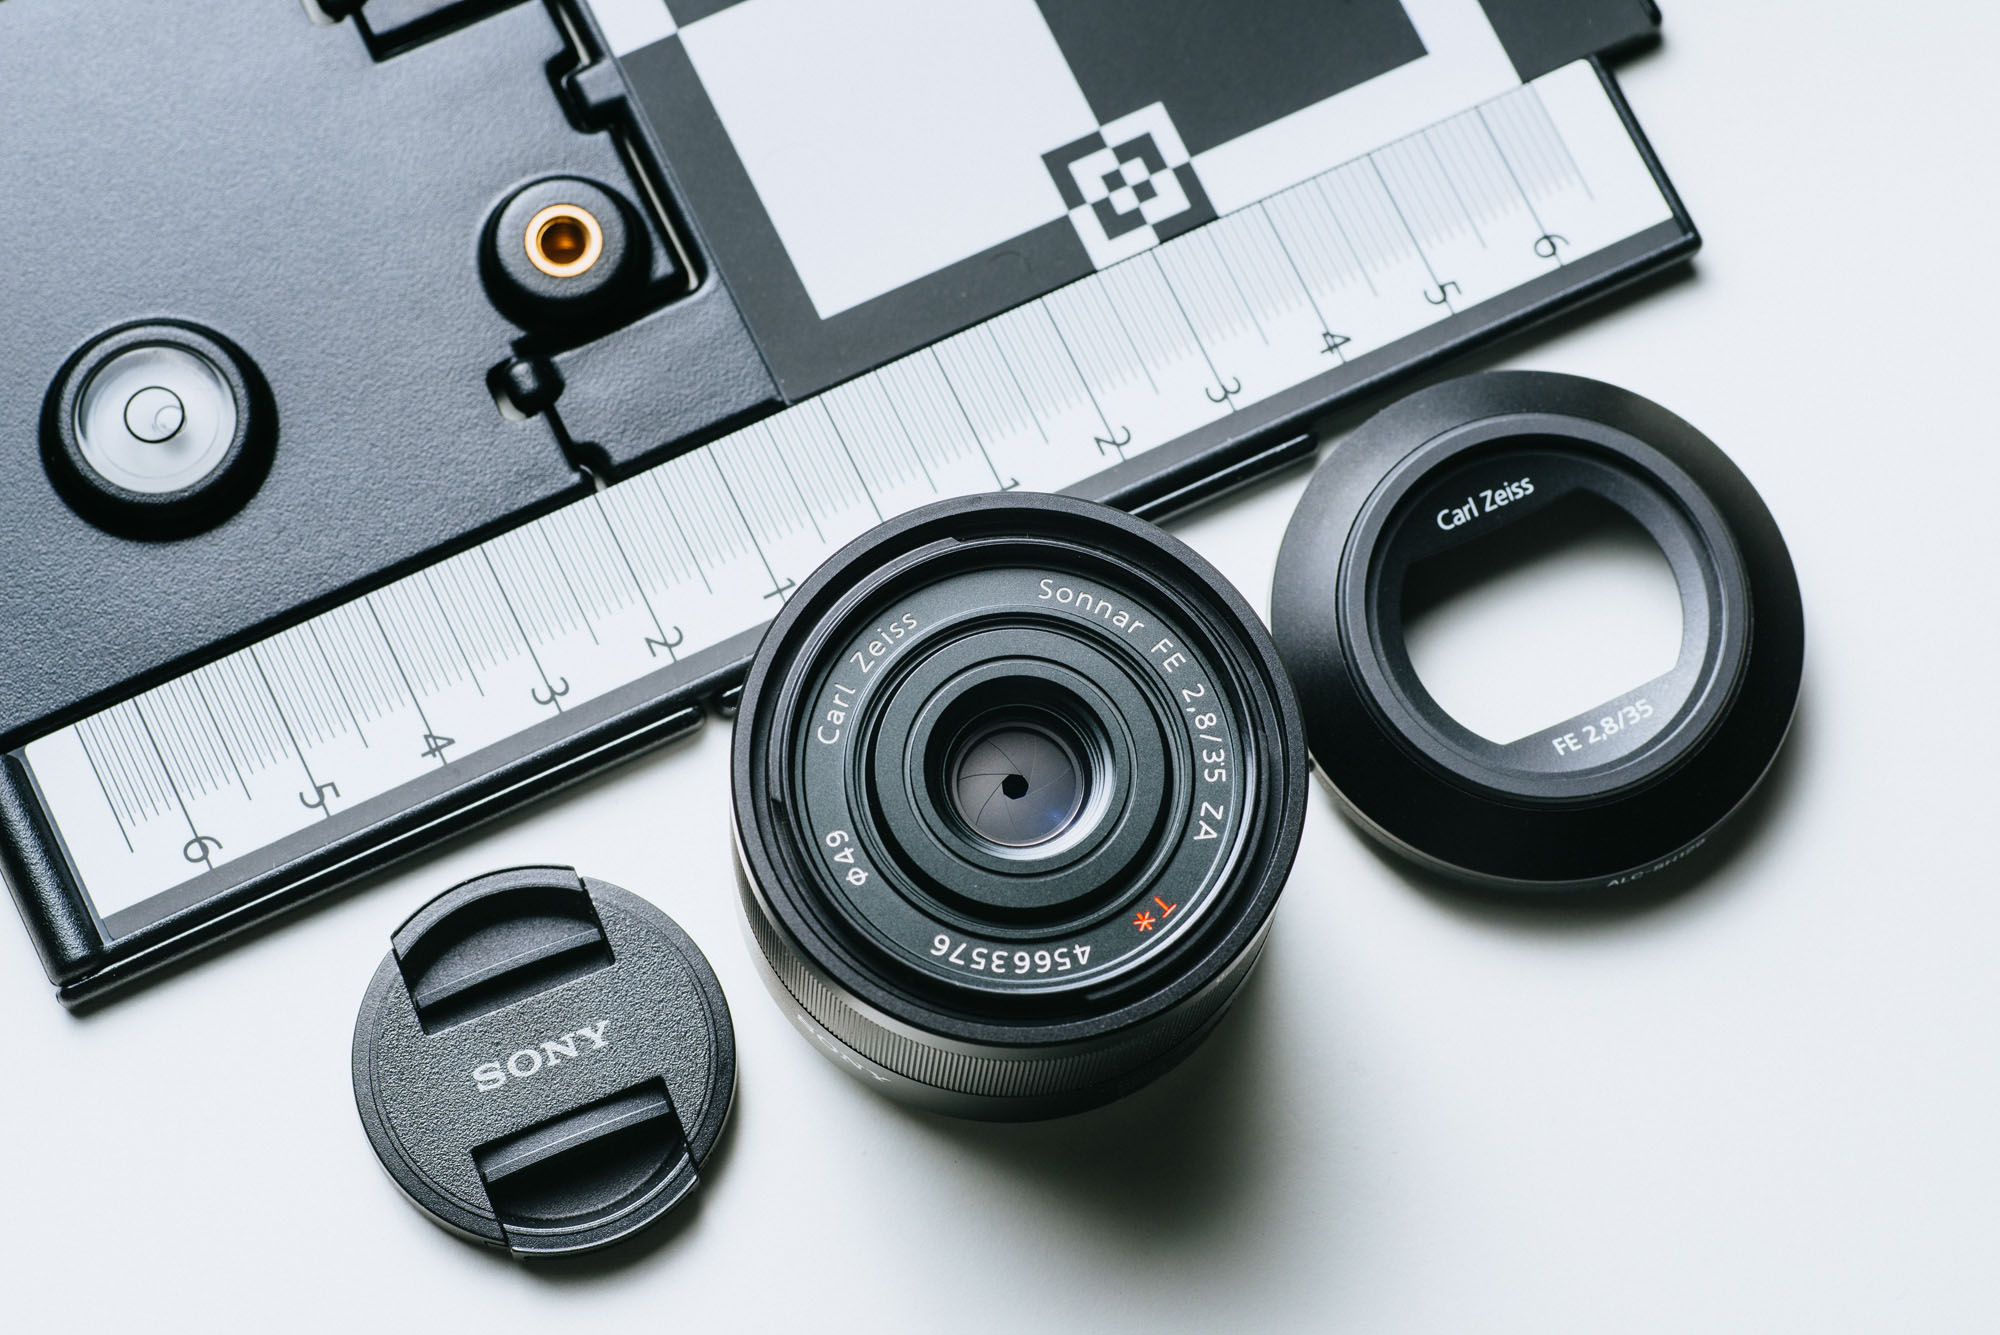 Sony_Zeiss_35mm_f_2.8_review_02